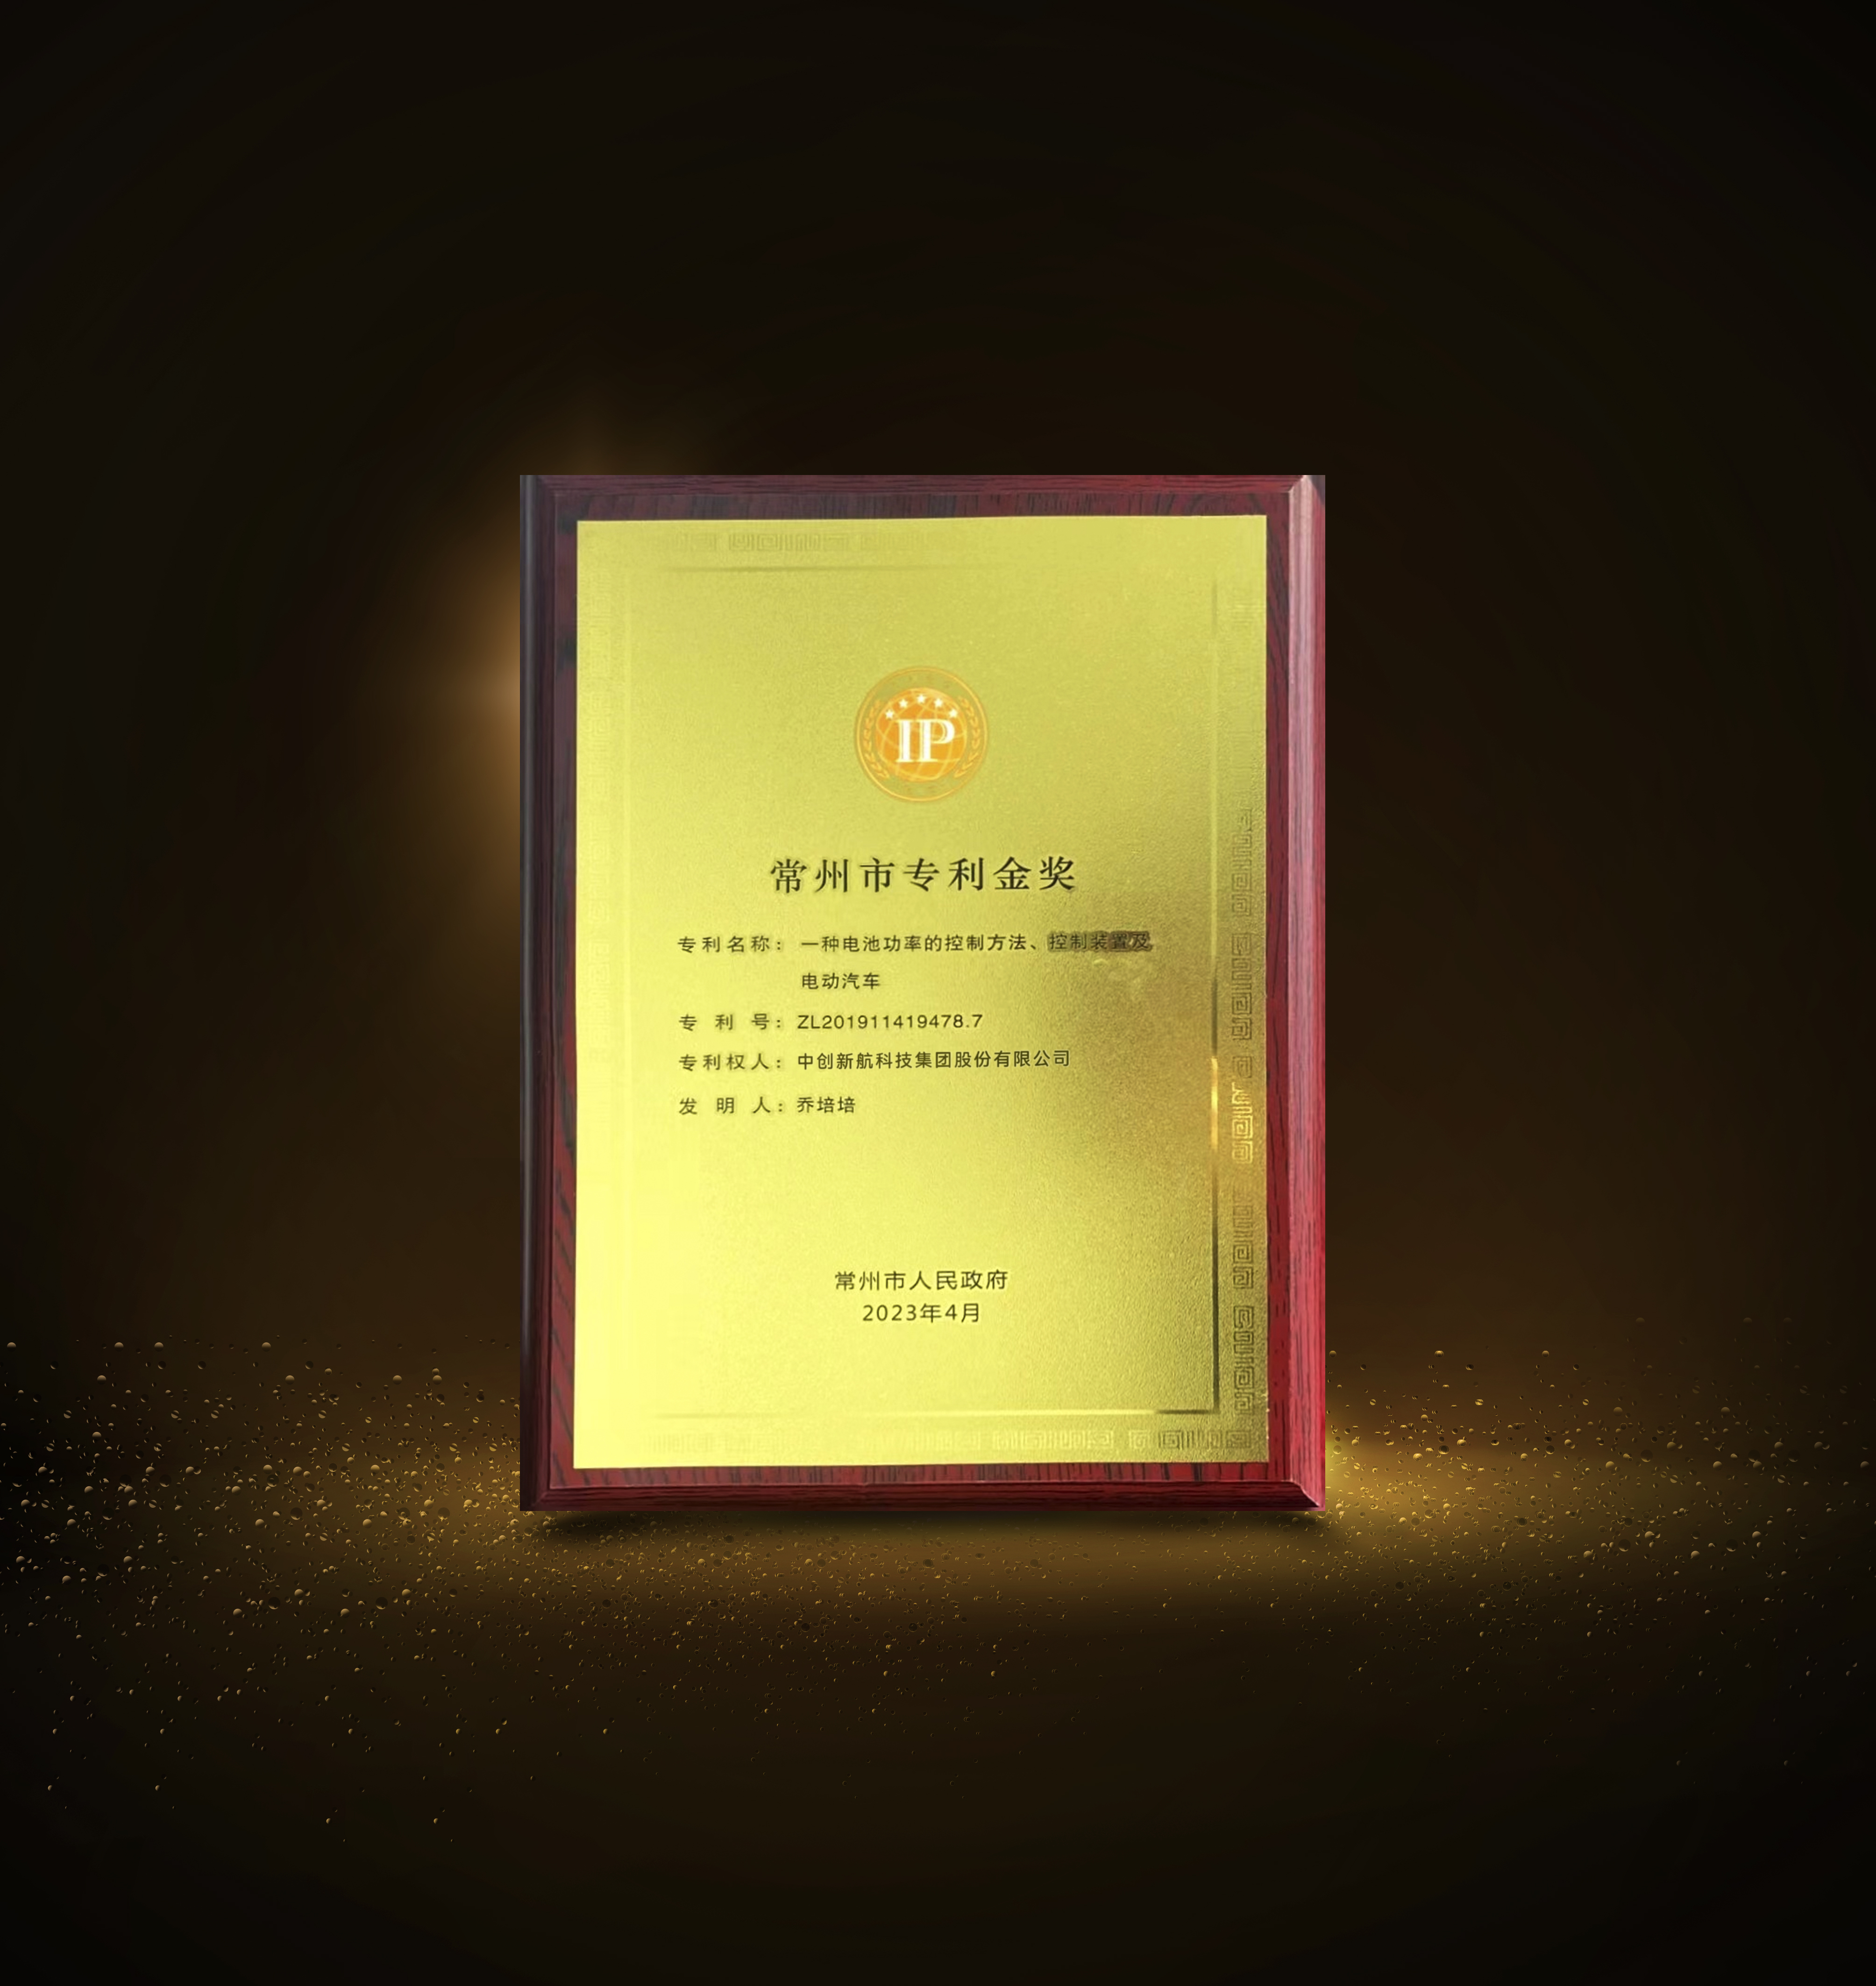 Practicing Social Responsibility丨CALB has been awarded as the "Outstanding Enterprise of Social Responsibility in Jiangsu"